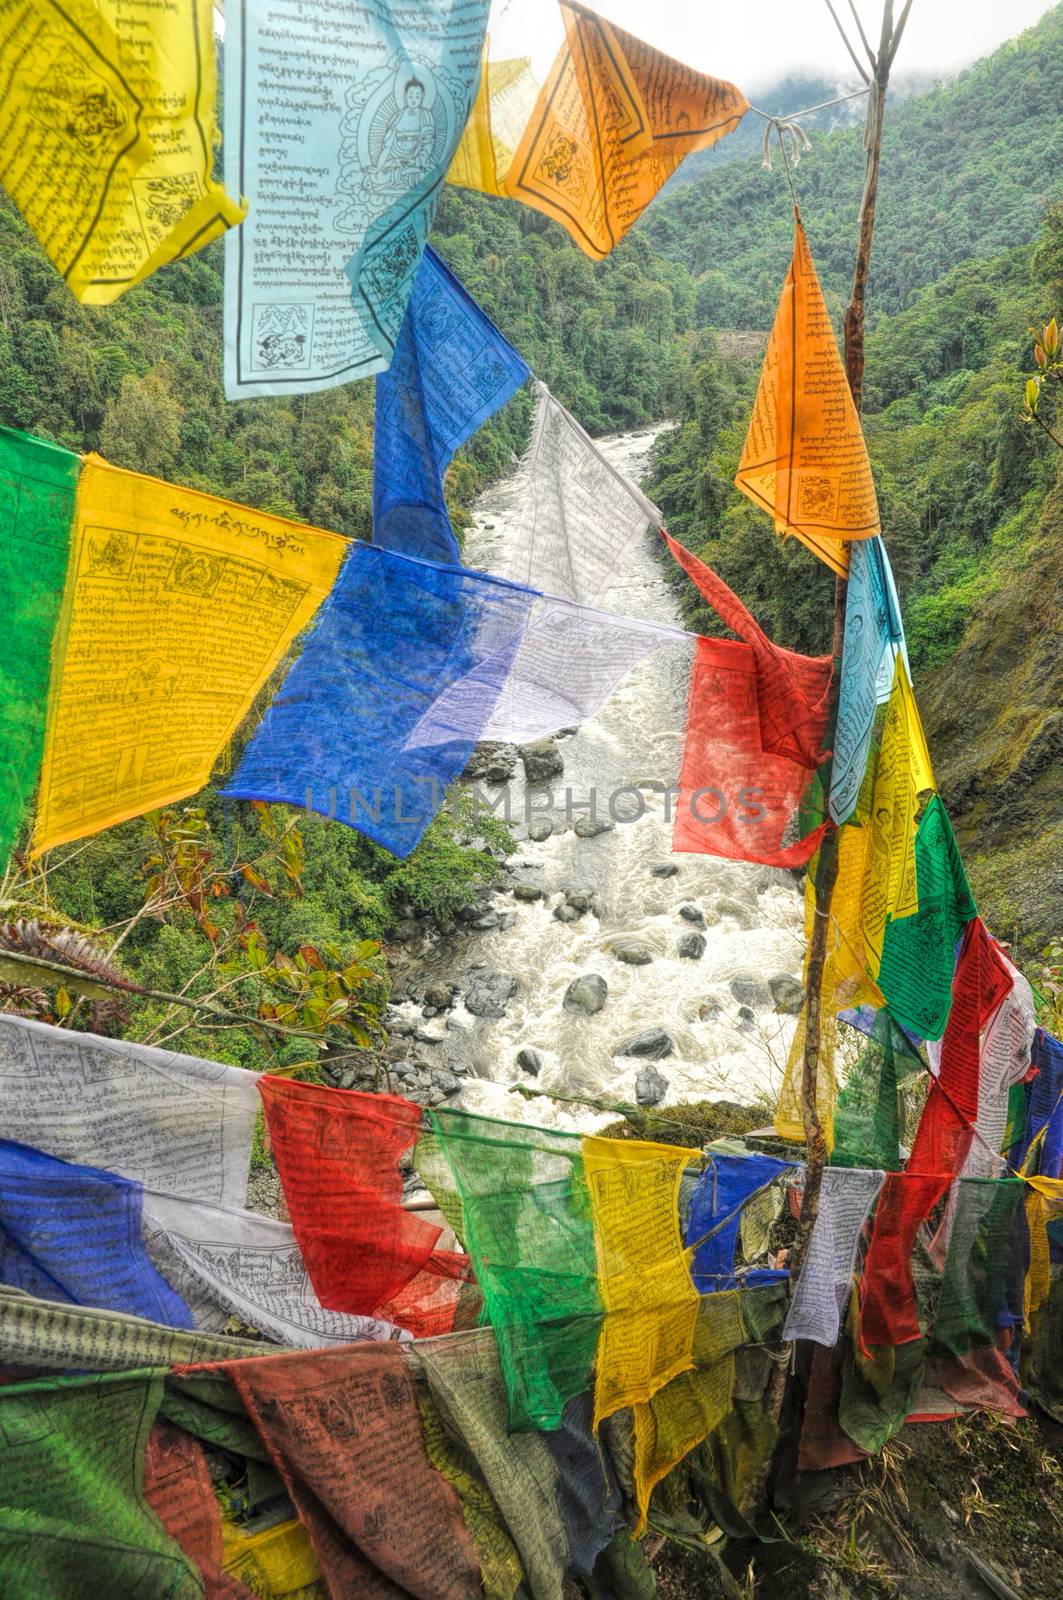 Buddhist prayer flags in India by MichalKnitl